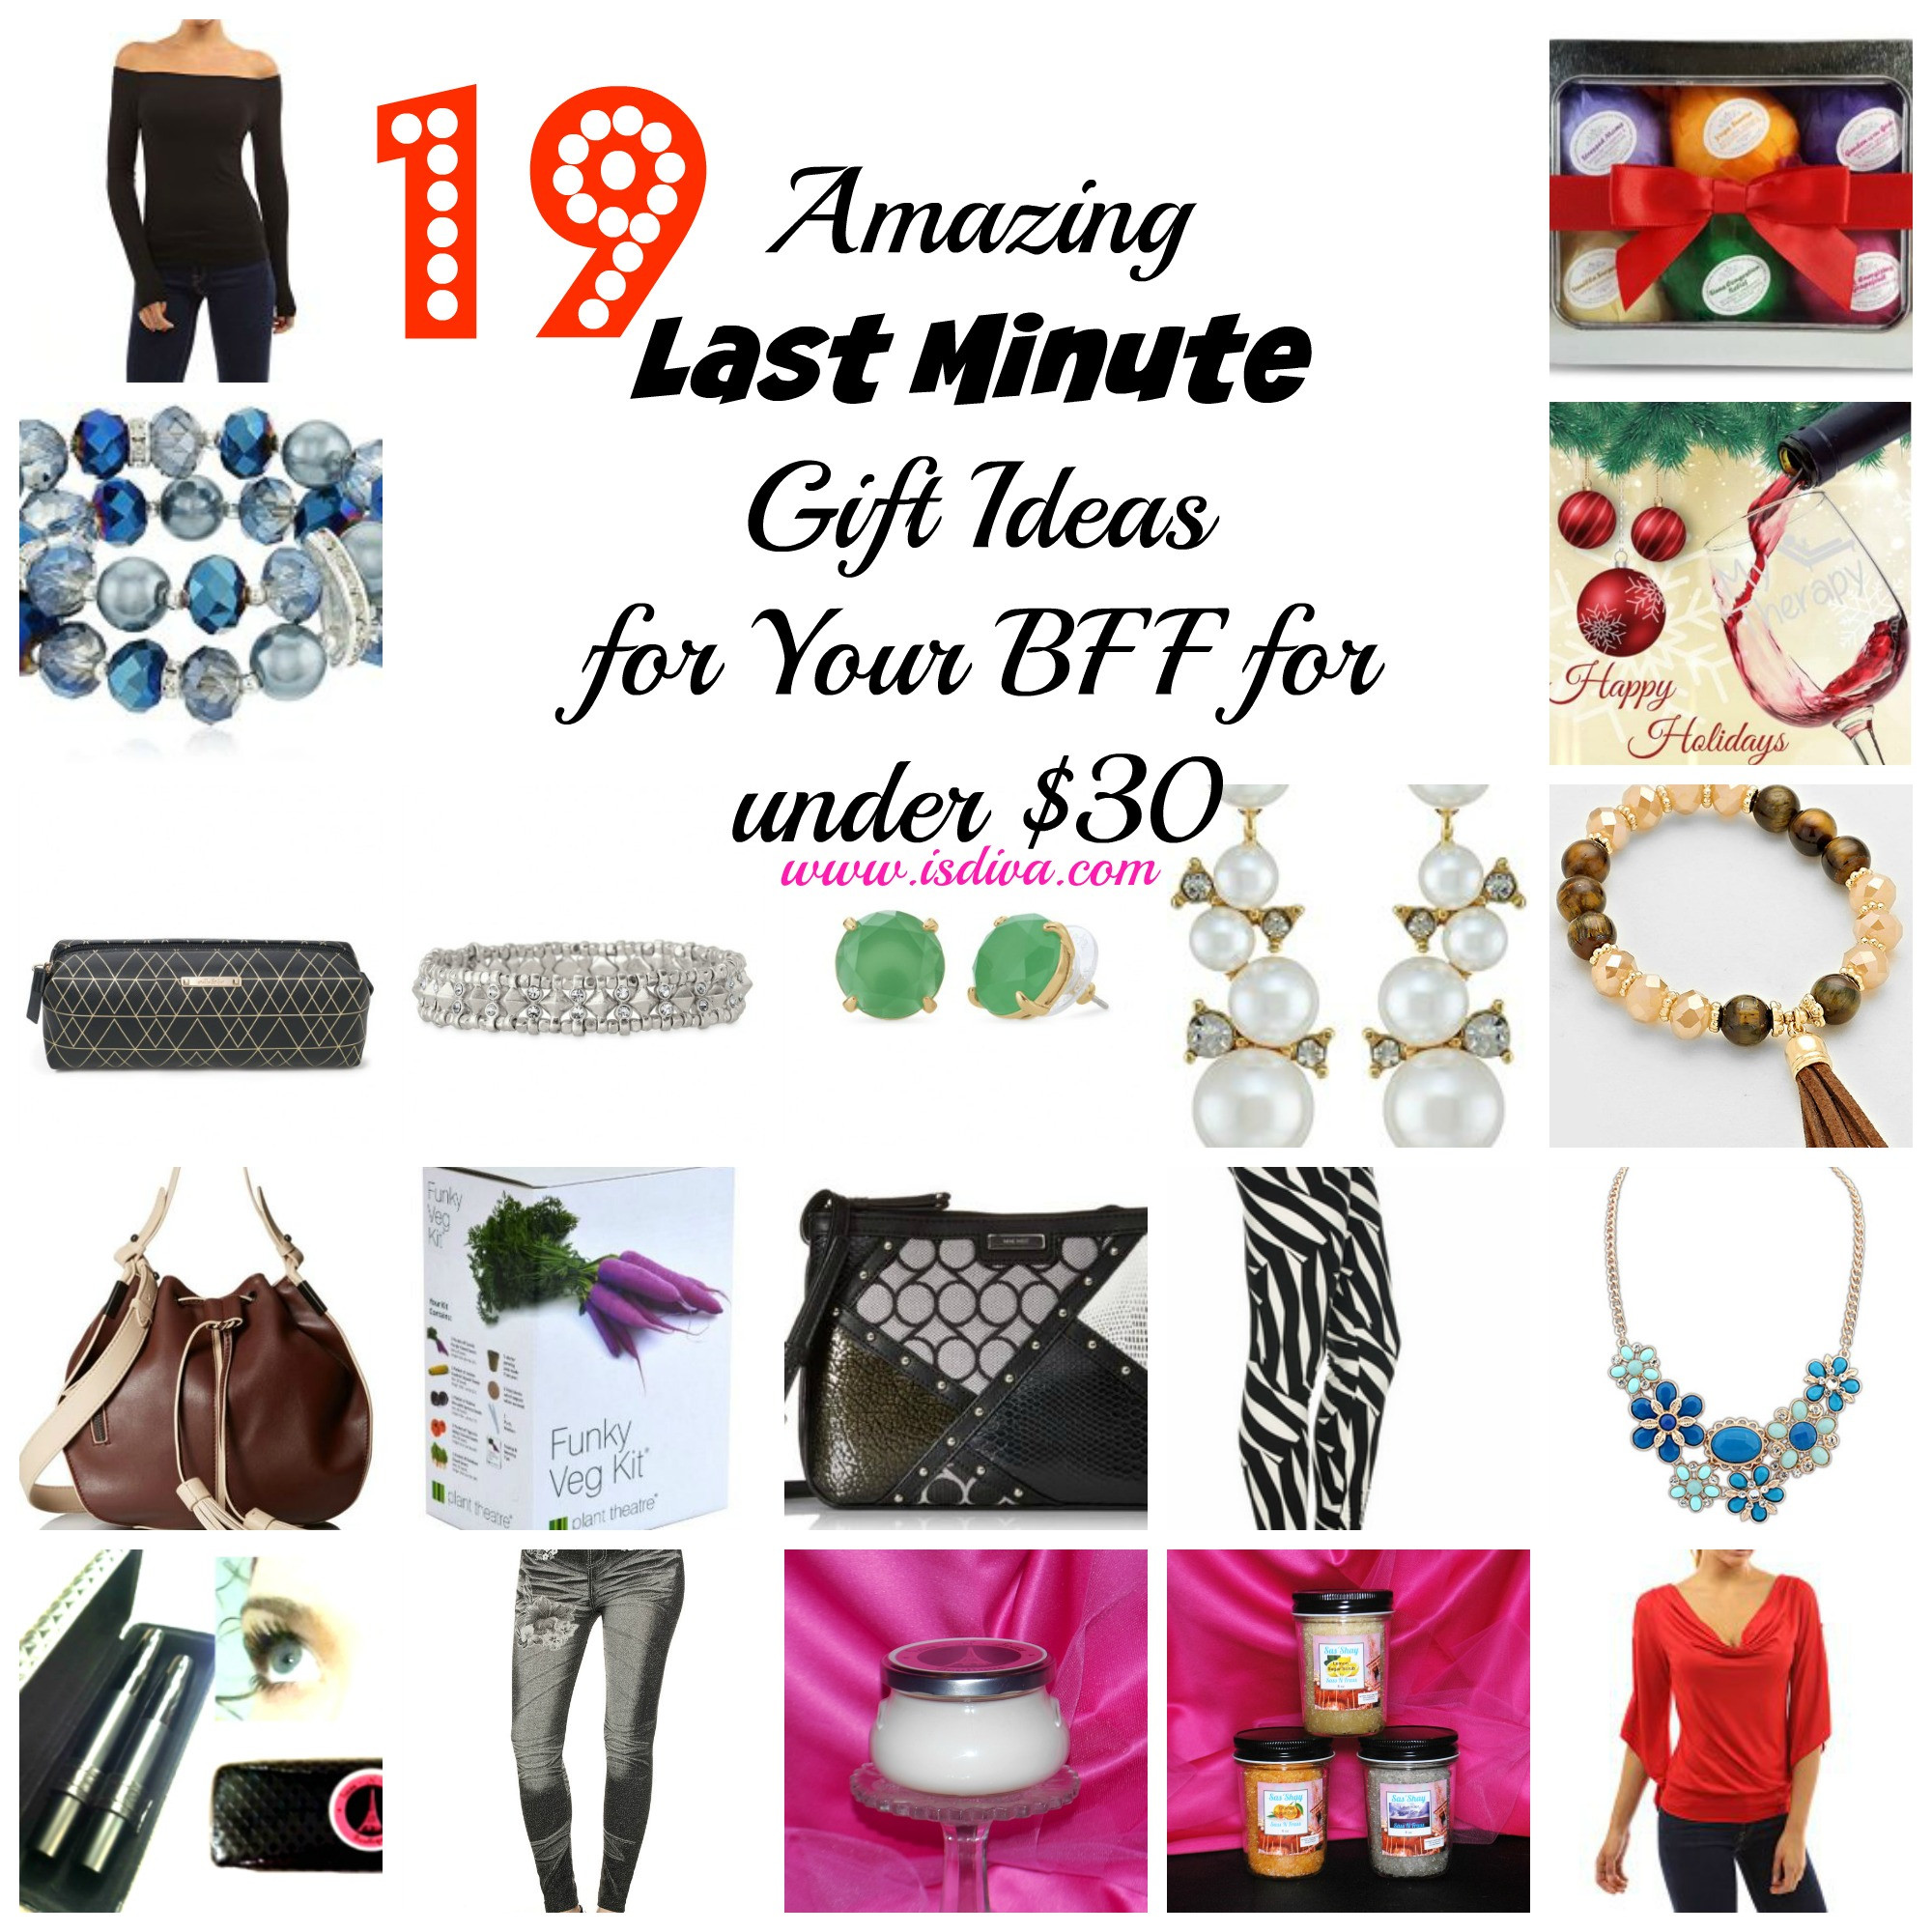 Gift Ideas For Best Friend Female
 Do you need some last minute t ideas for your best